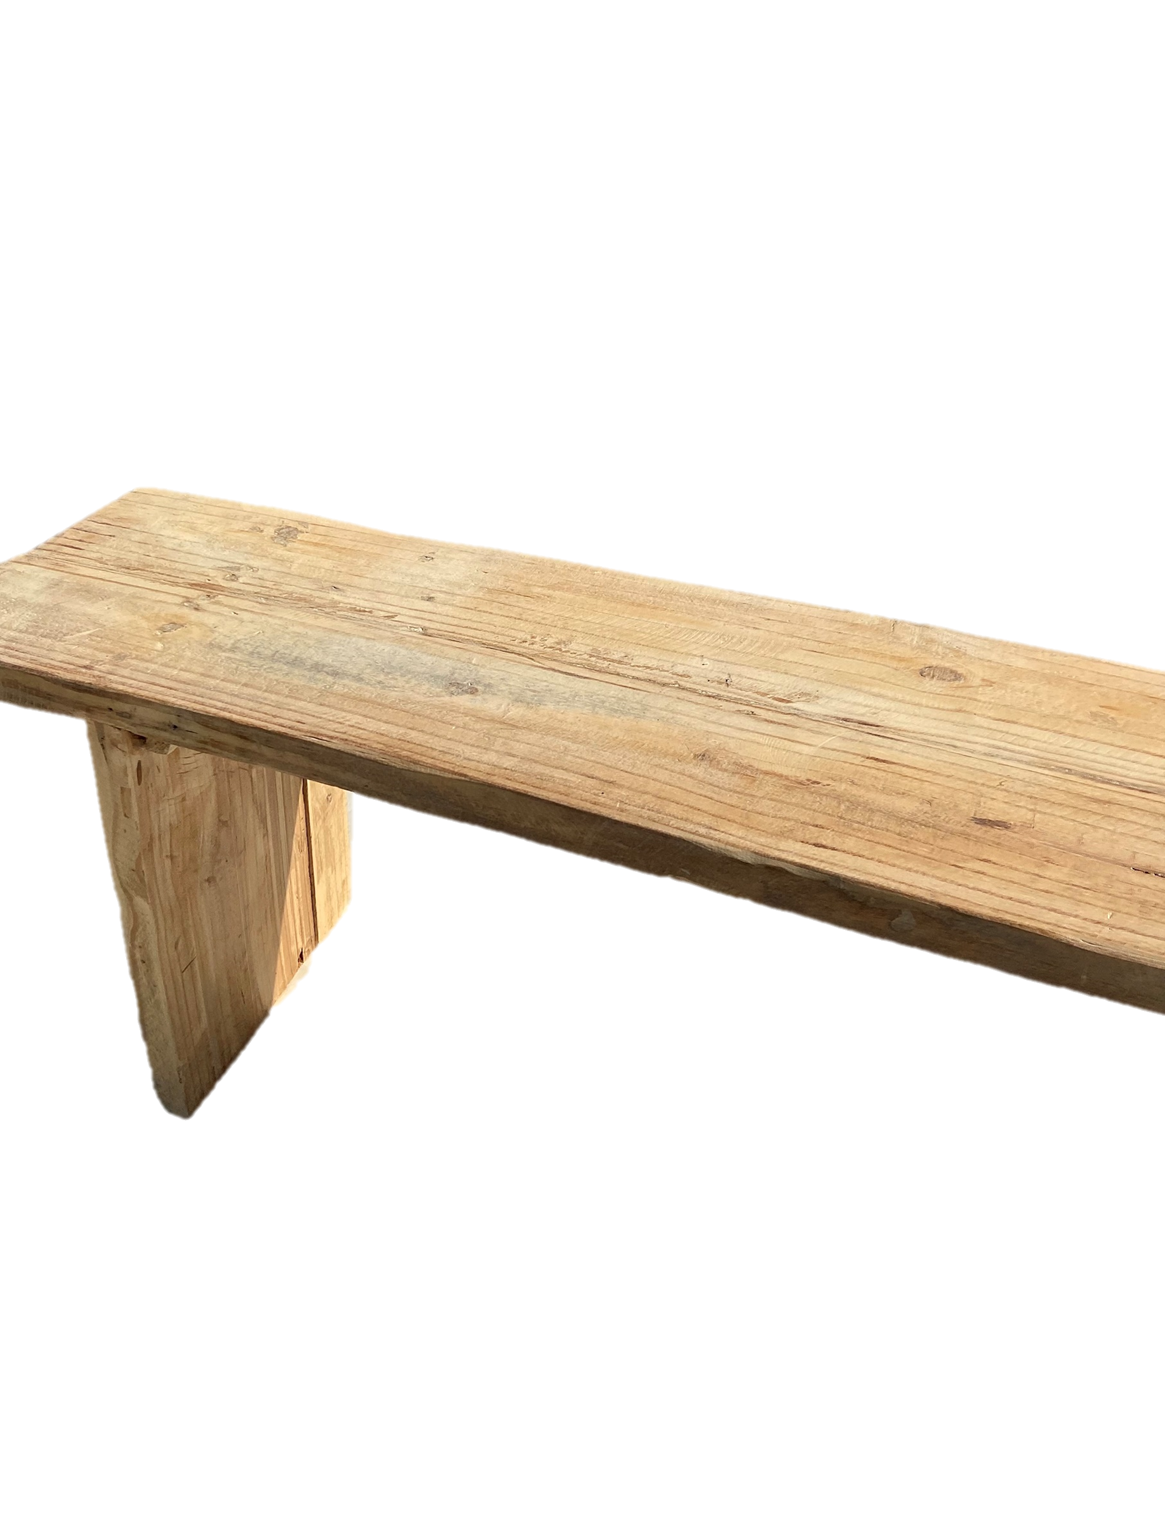 Bleached Wood Rustic Bench/Reclaimed Wood Bench